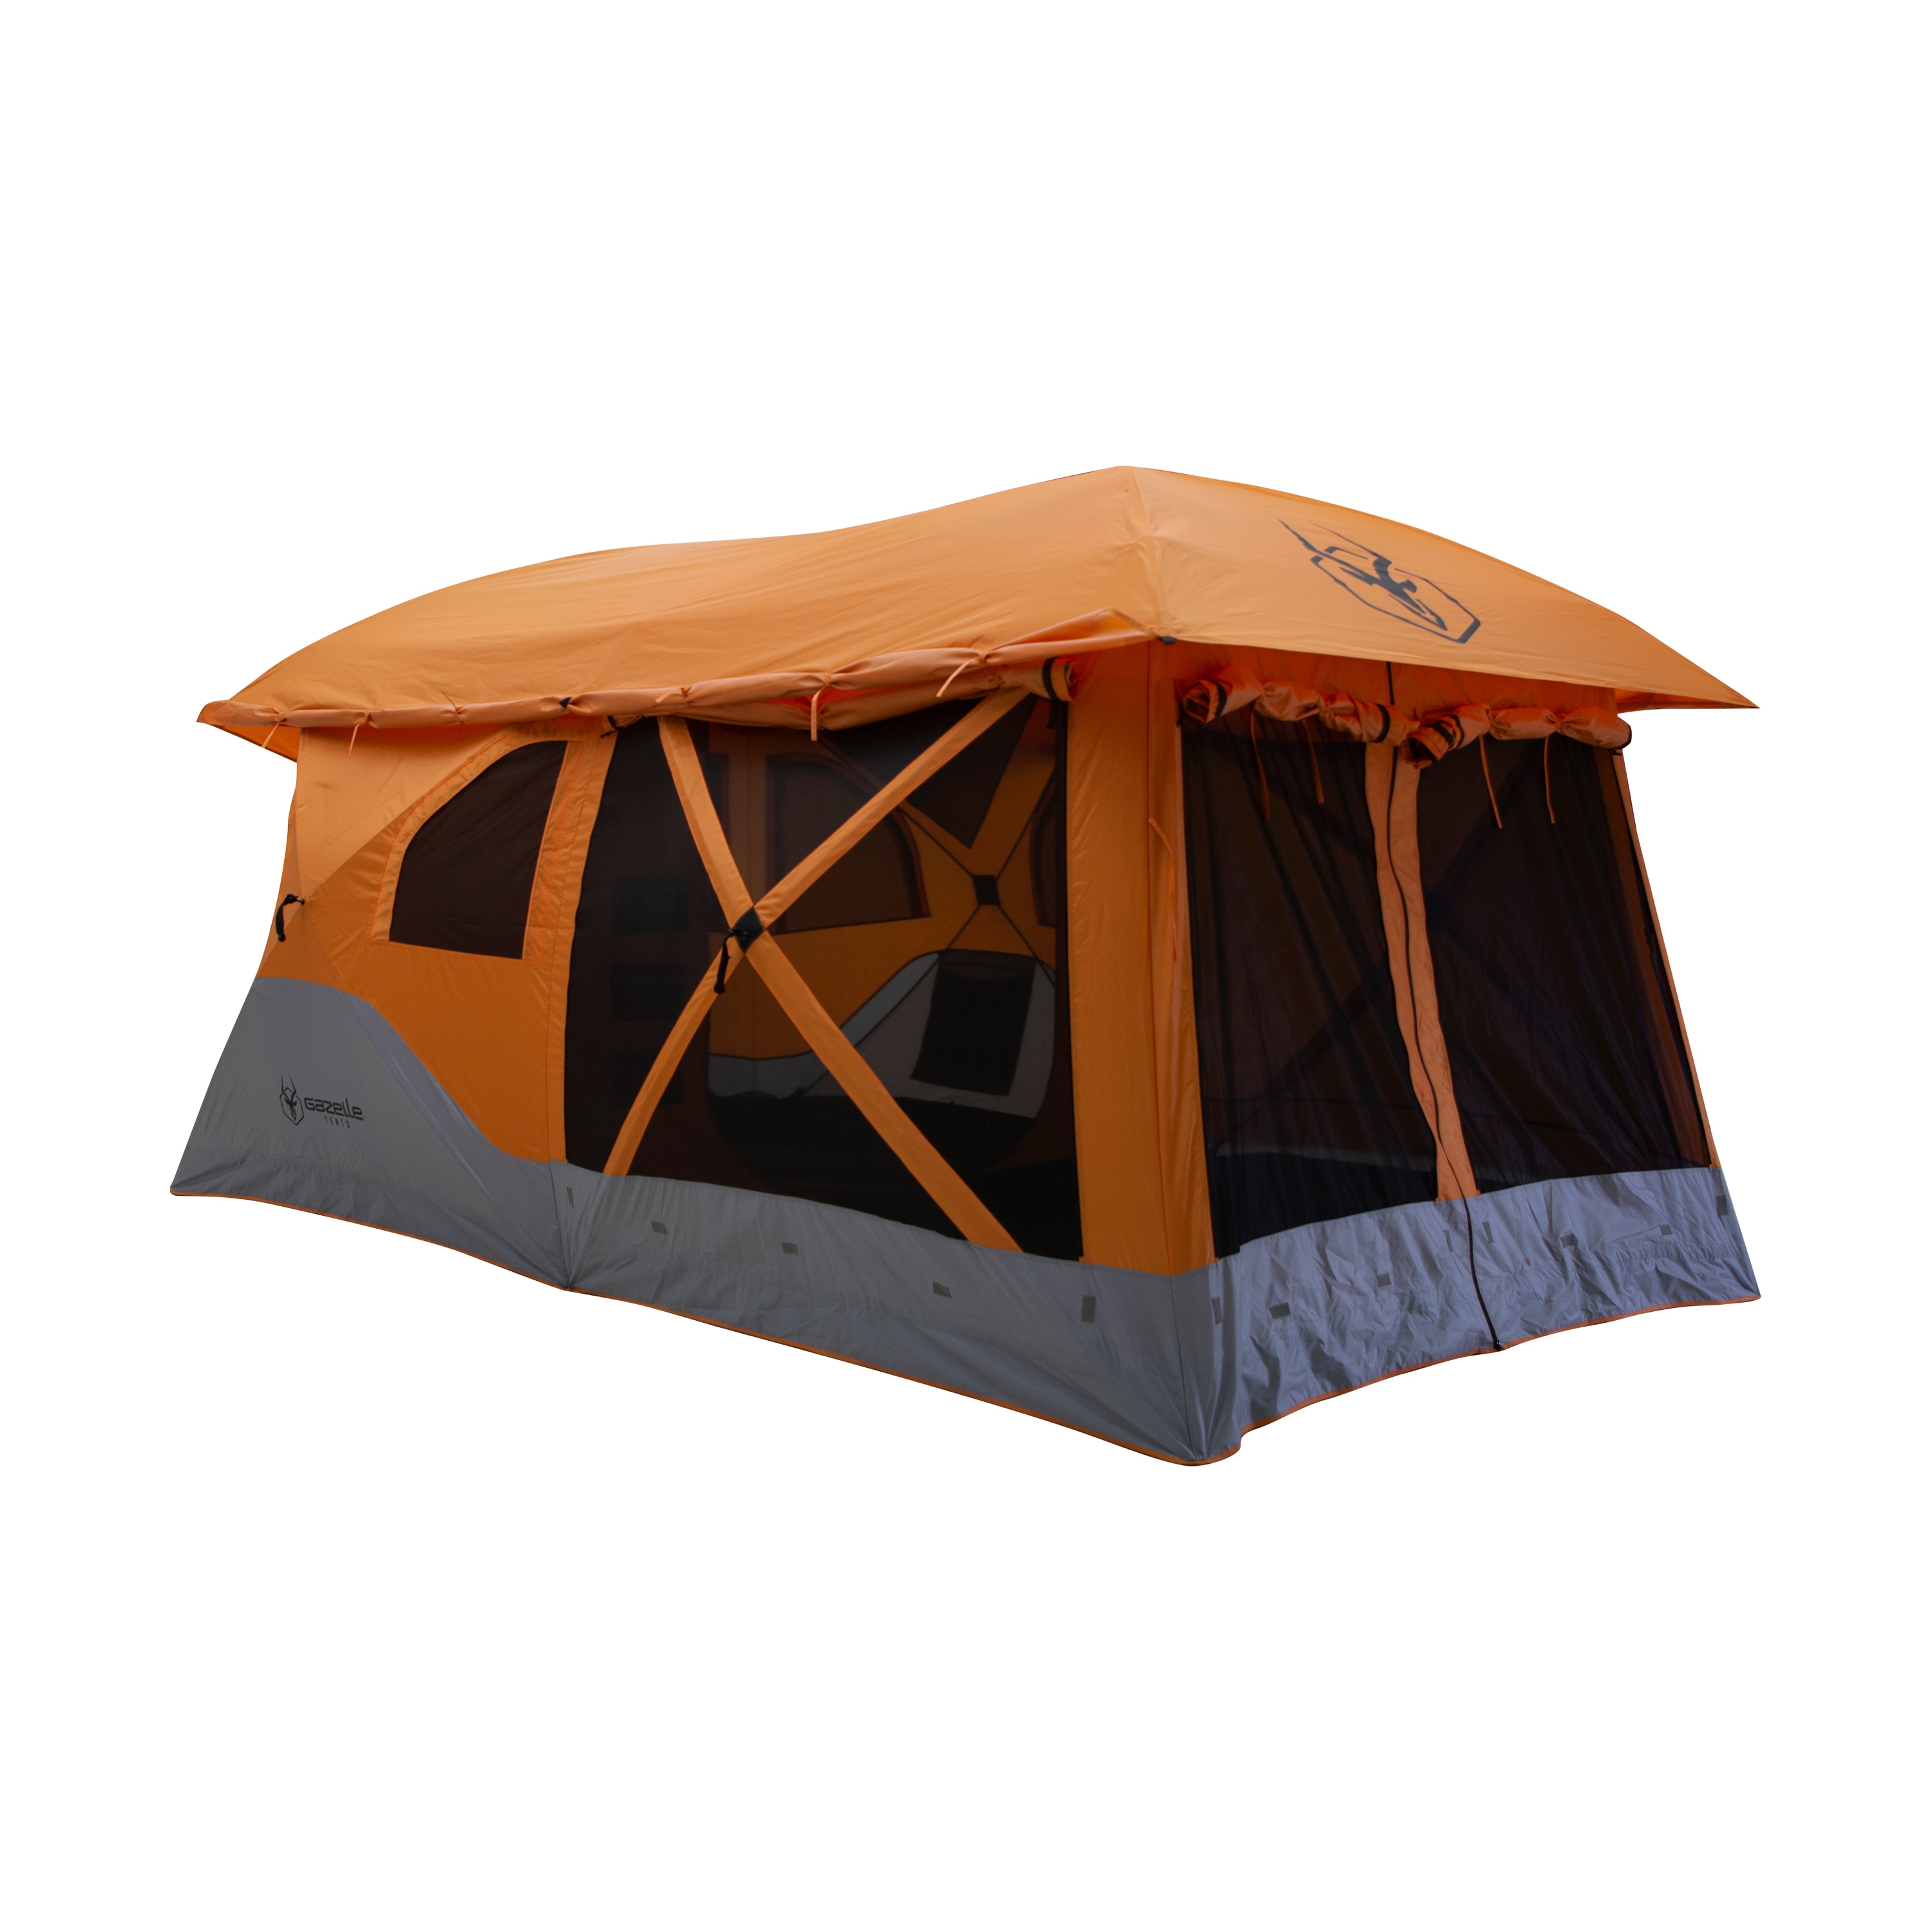 Gazelle 8-Person Tent in the Tents at